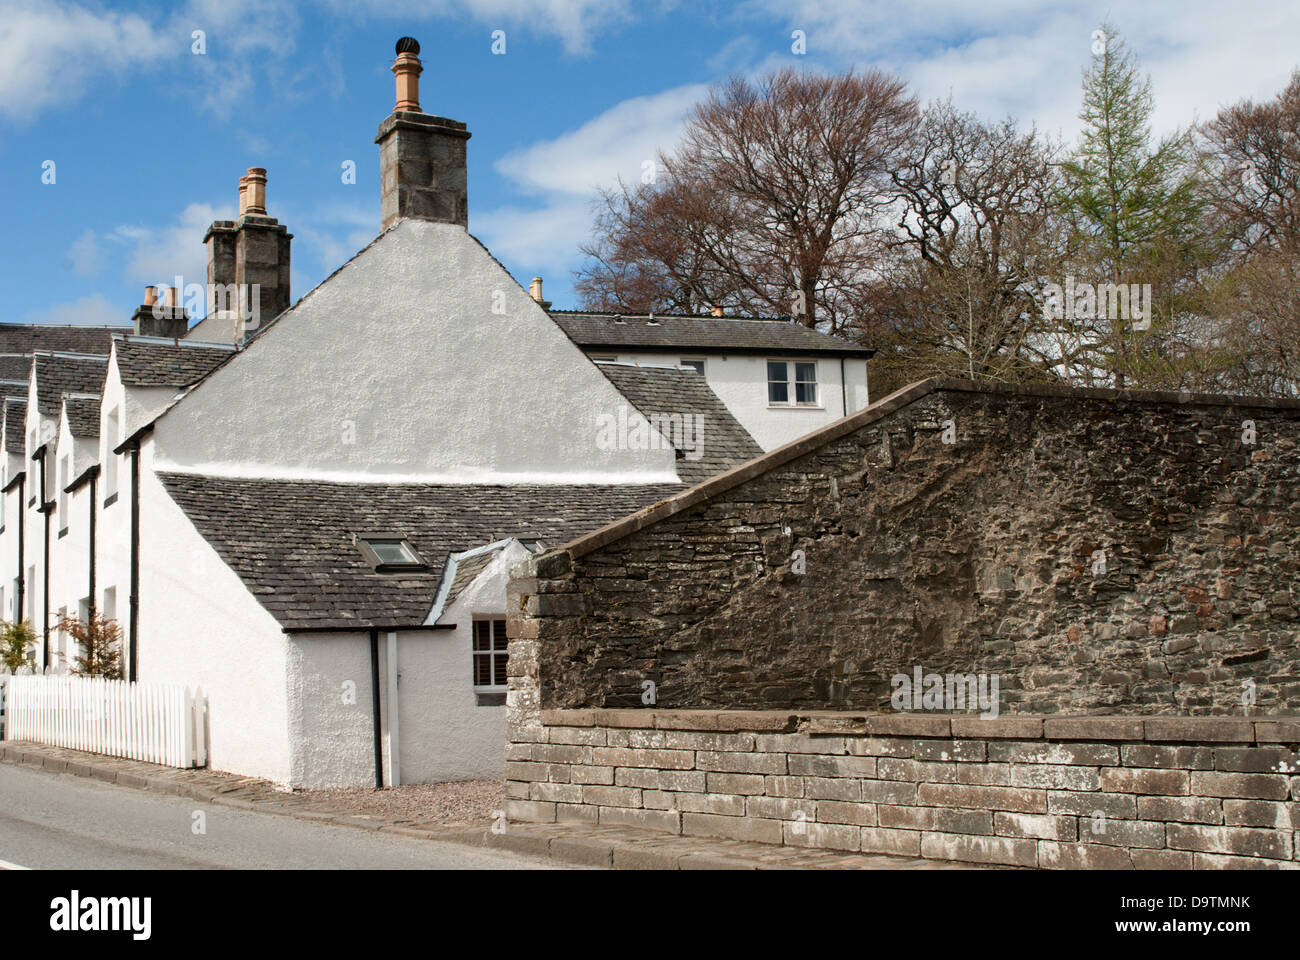 White harled buildings in a Scottish village Stock Photo